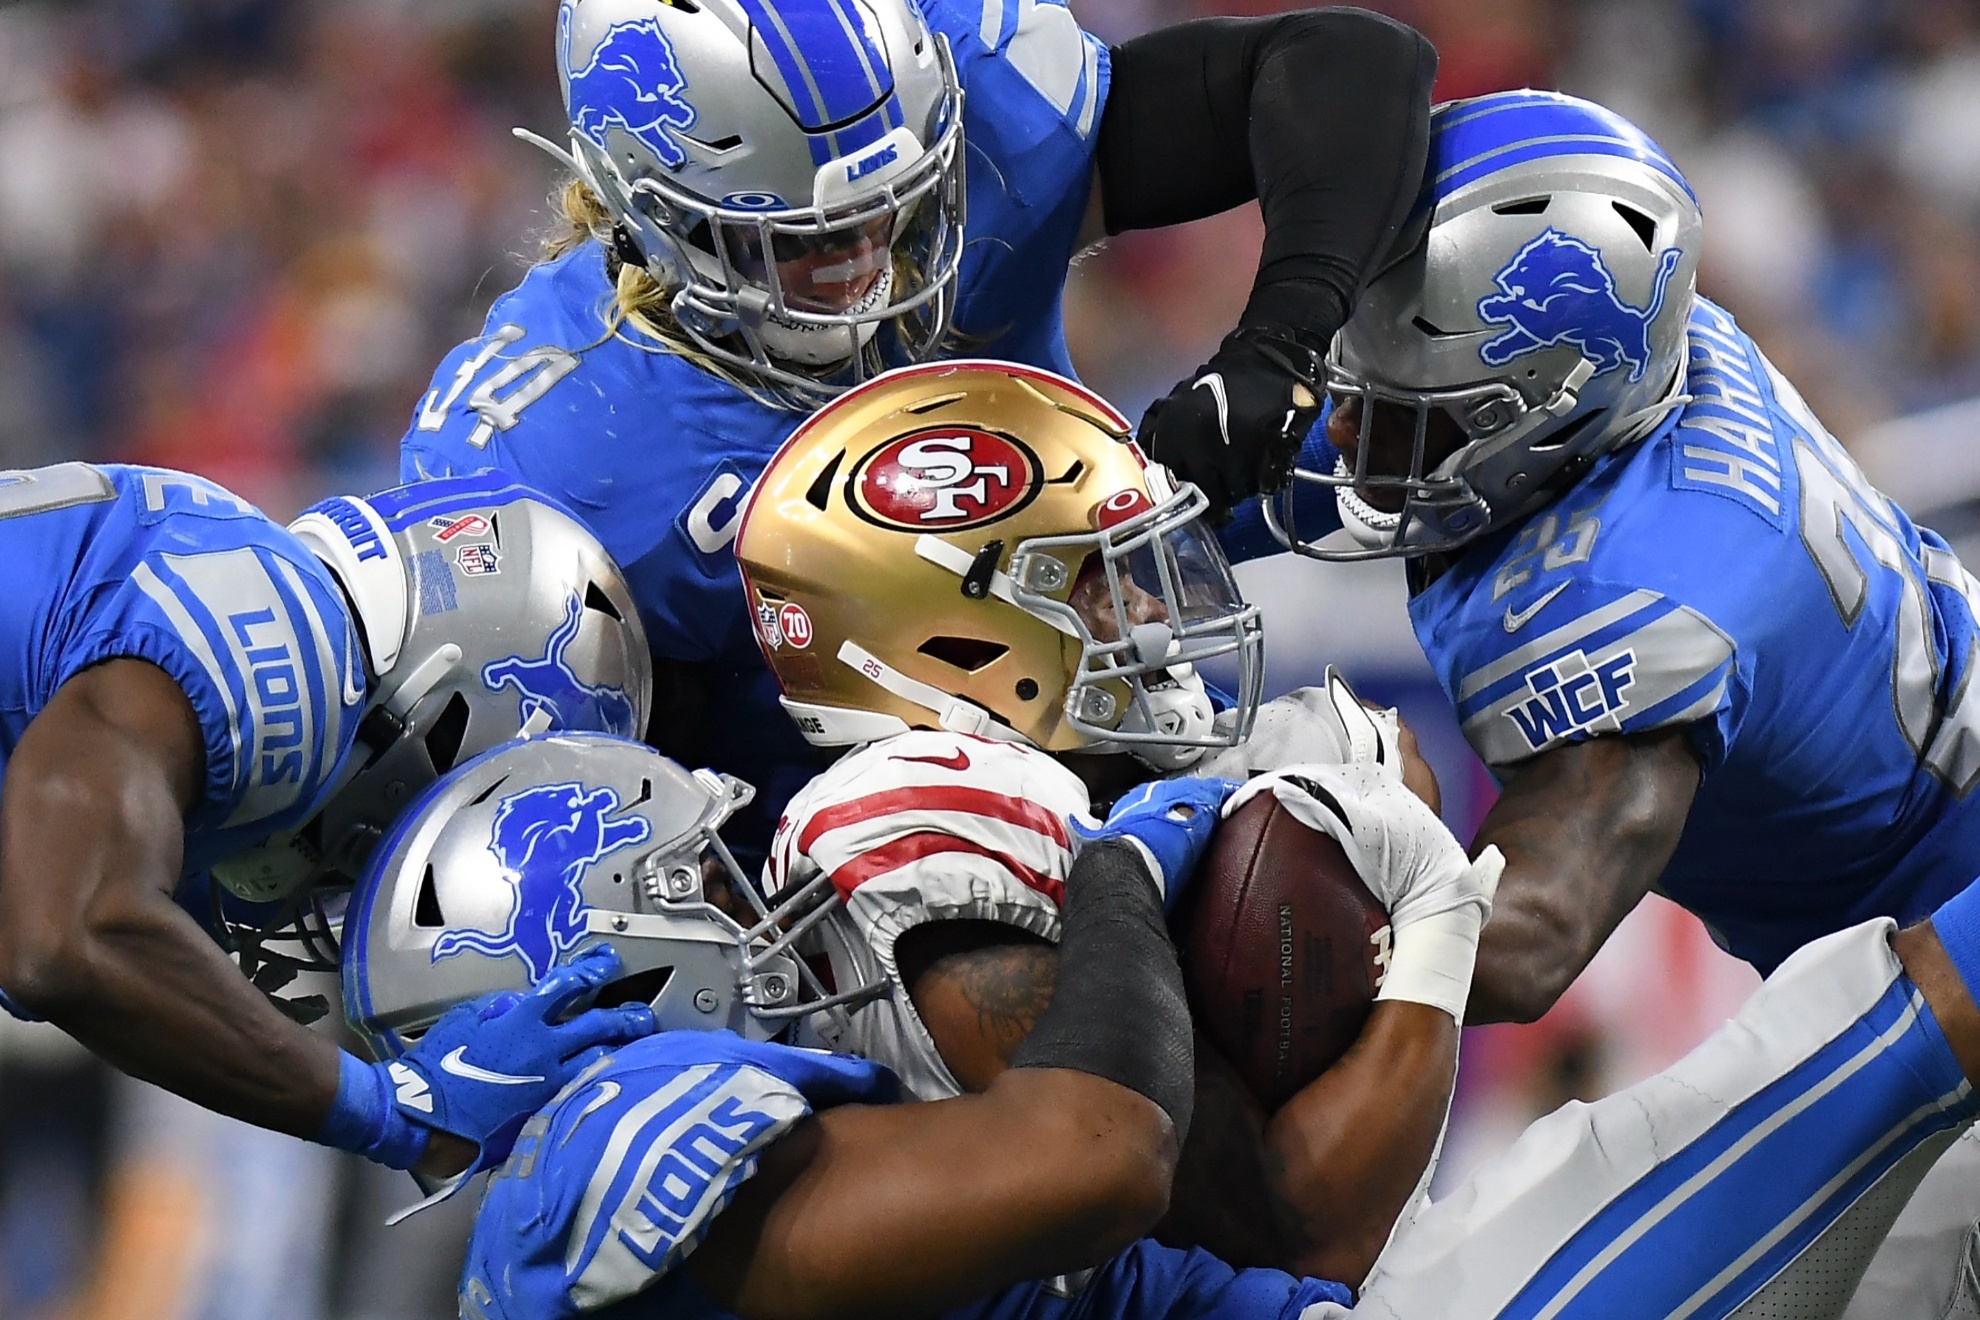 Detroit Lions and San Francisco 49ers will dispute the NFC title this Sunday.